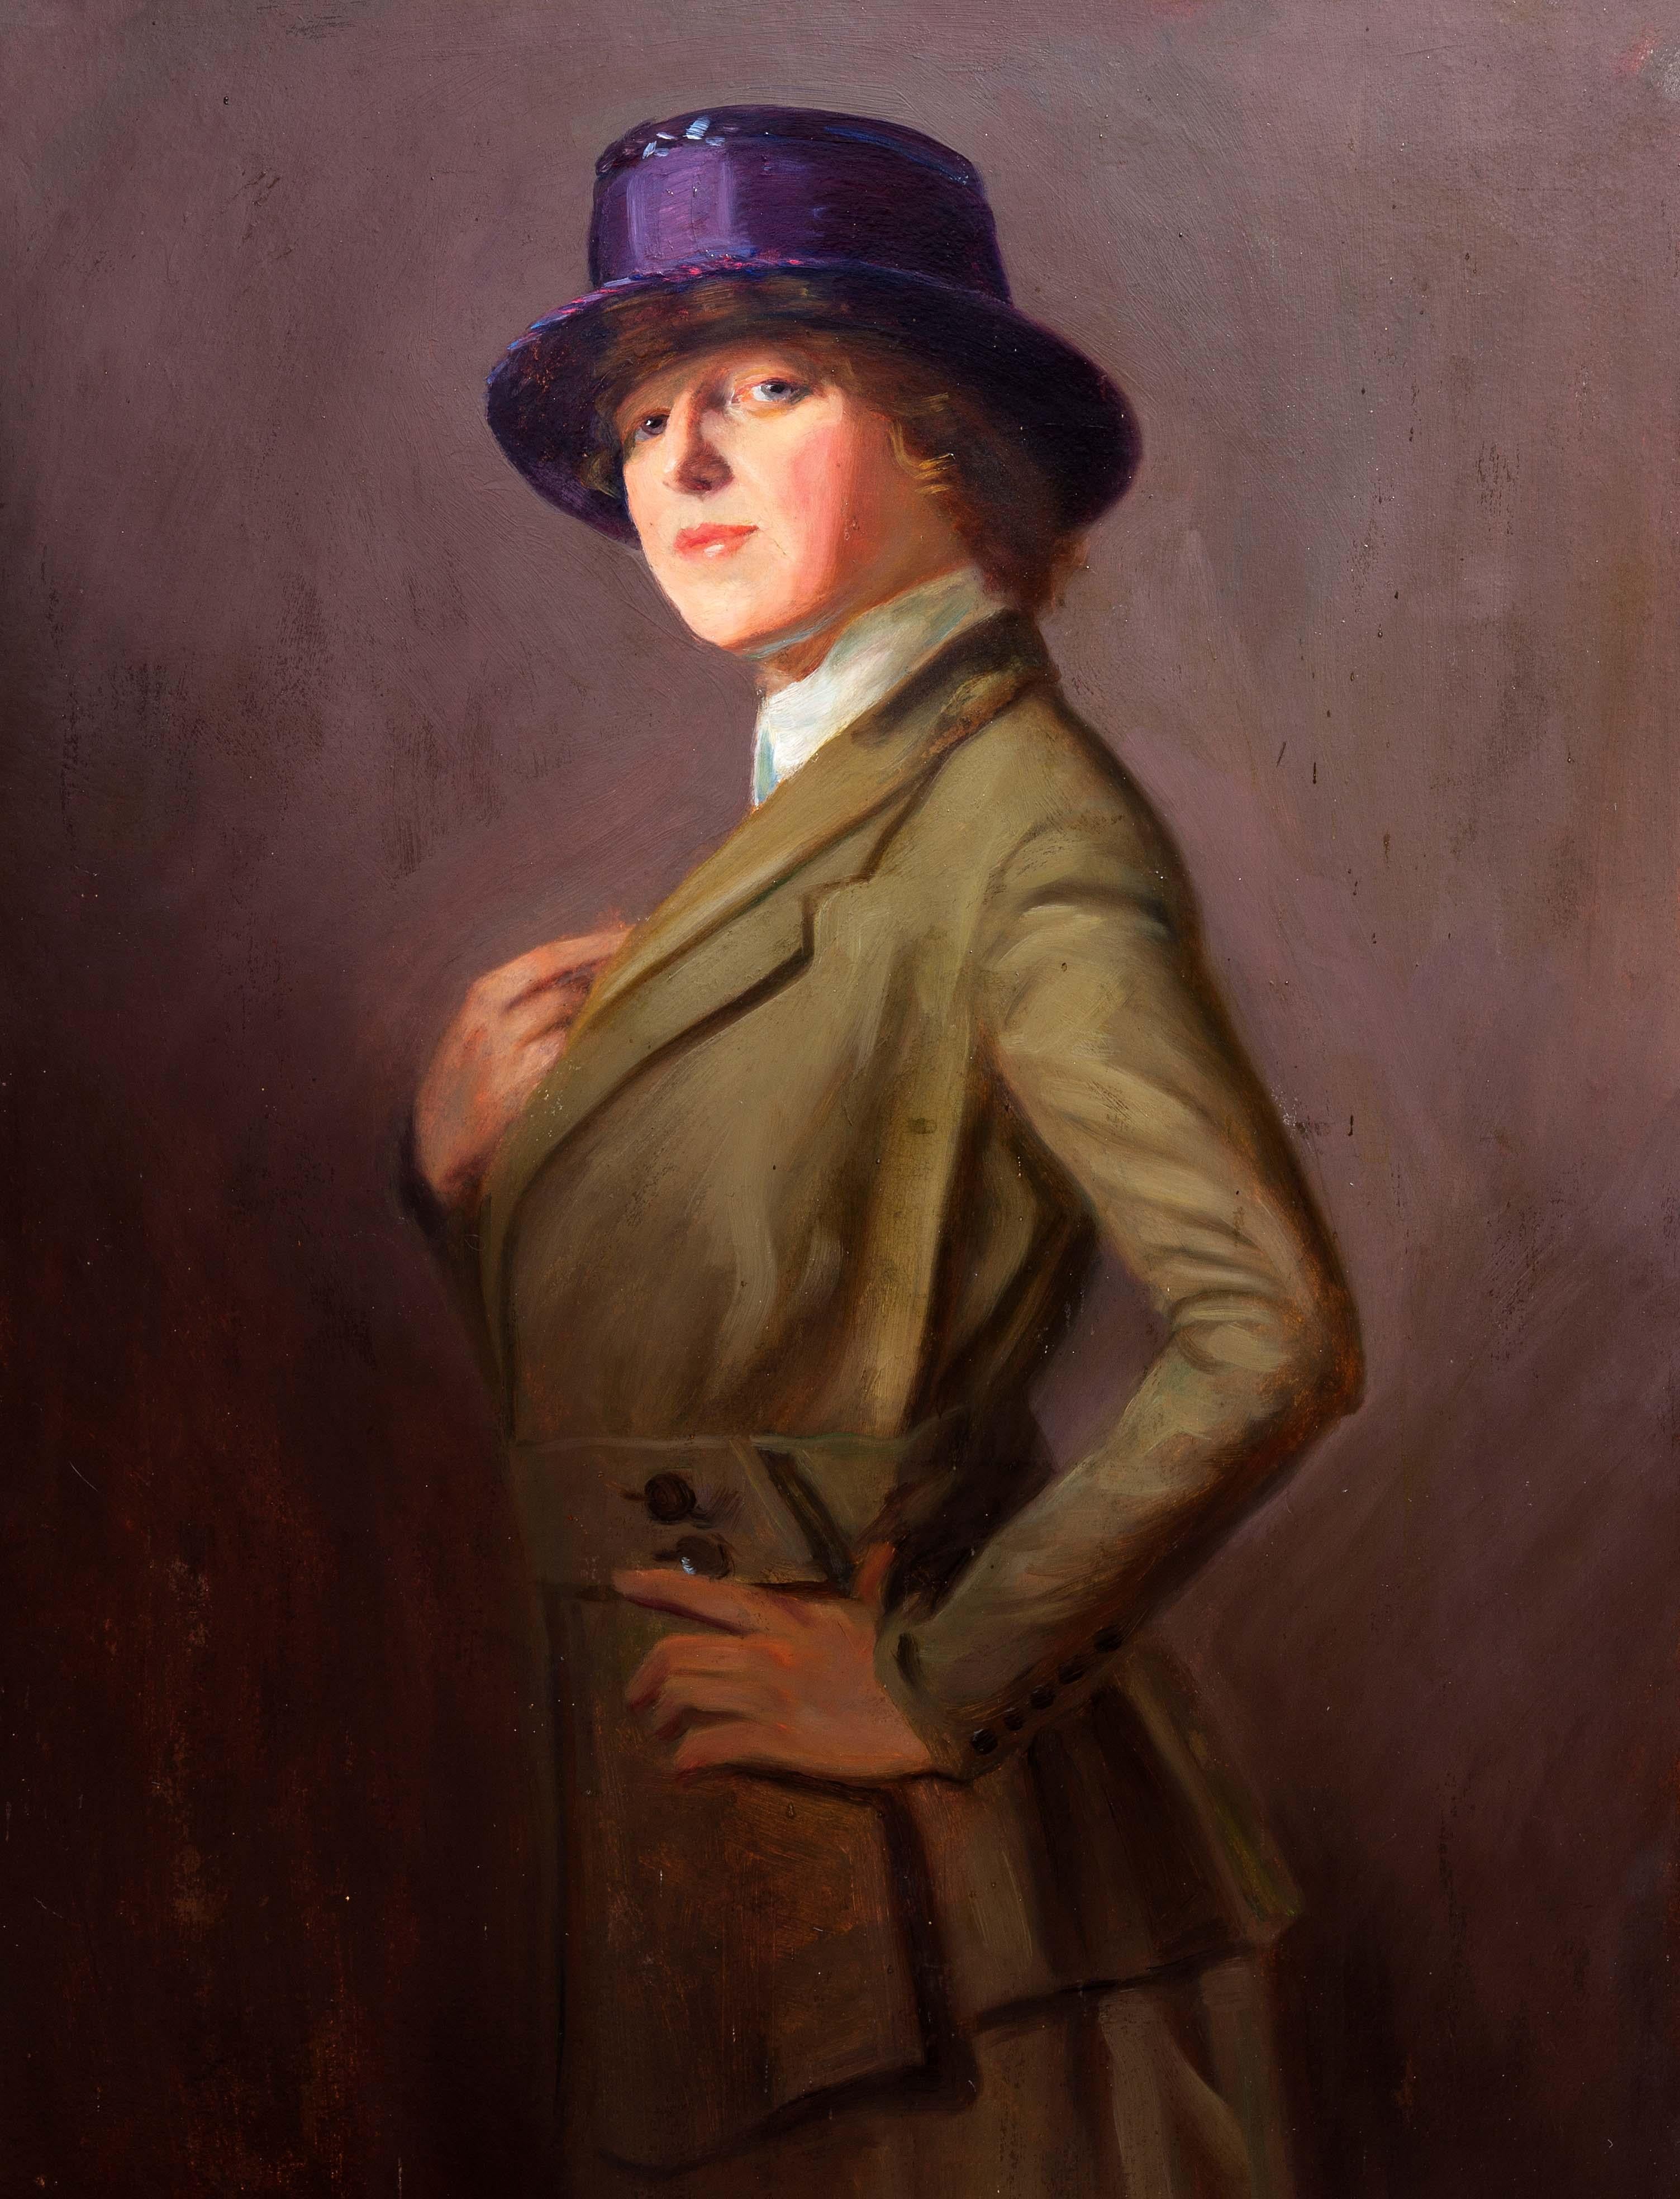 Bold portrait of a woman in riding clothes. Oil on board by American painter William E. Prather. Signed and dated 1918. In the original Whistler style frame. Please, contact us for shipping options.

Biography from the Archives of askART

This